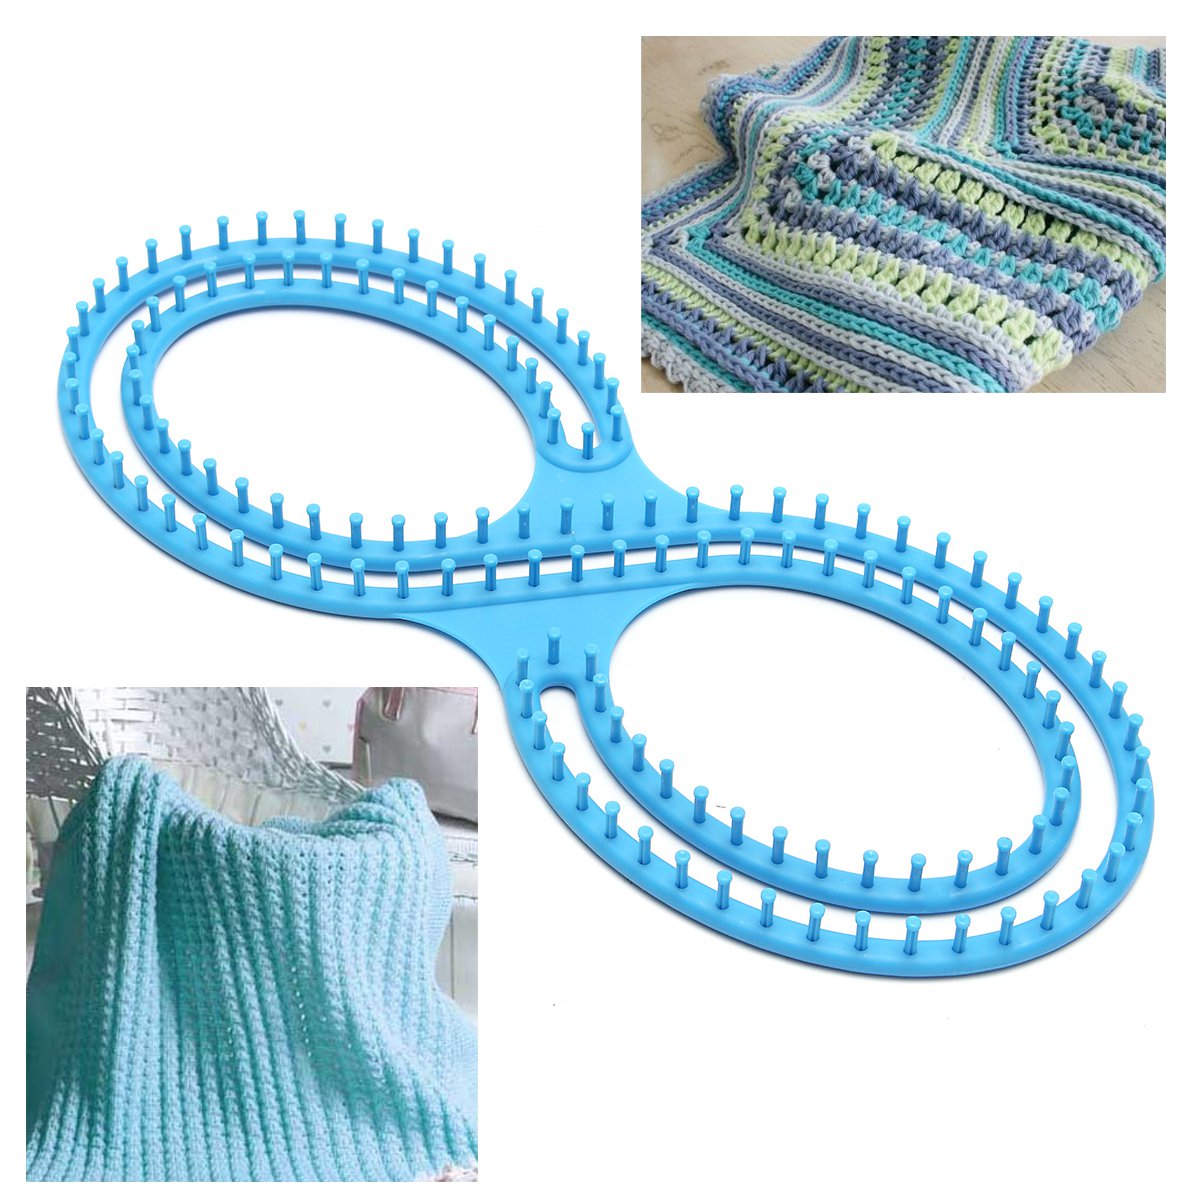 Round-Loom-Board-Knitting-Knitter-Ring-Set-Craft-Tools-Kit-For-Sock-Scarf-Hat-Sweater-1363733